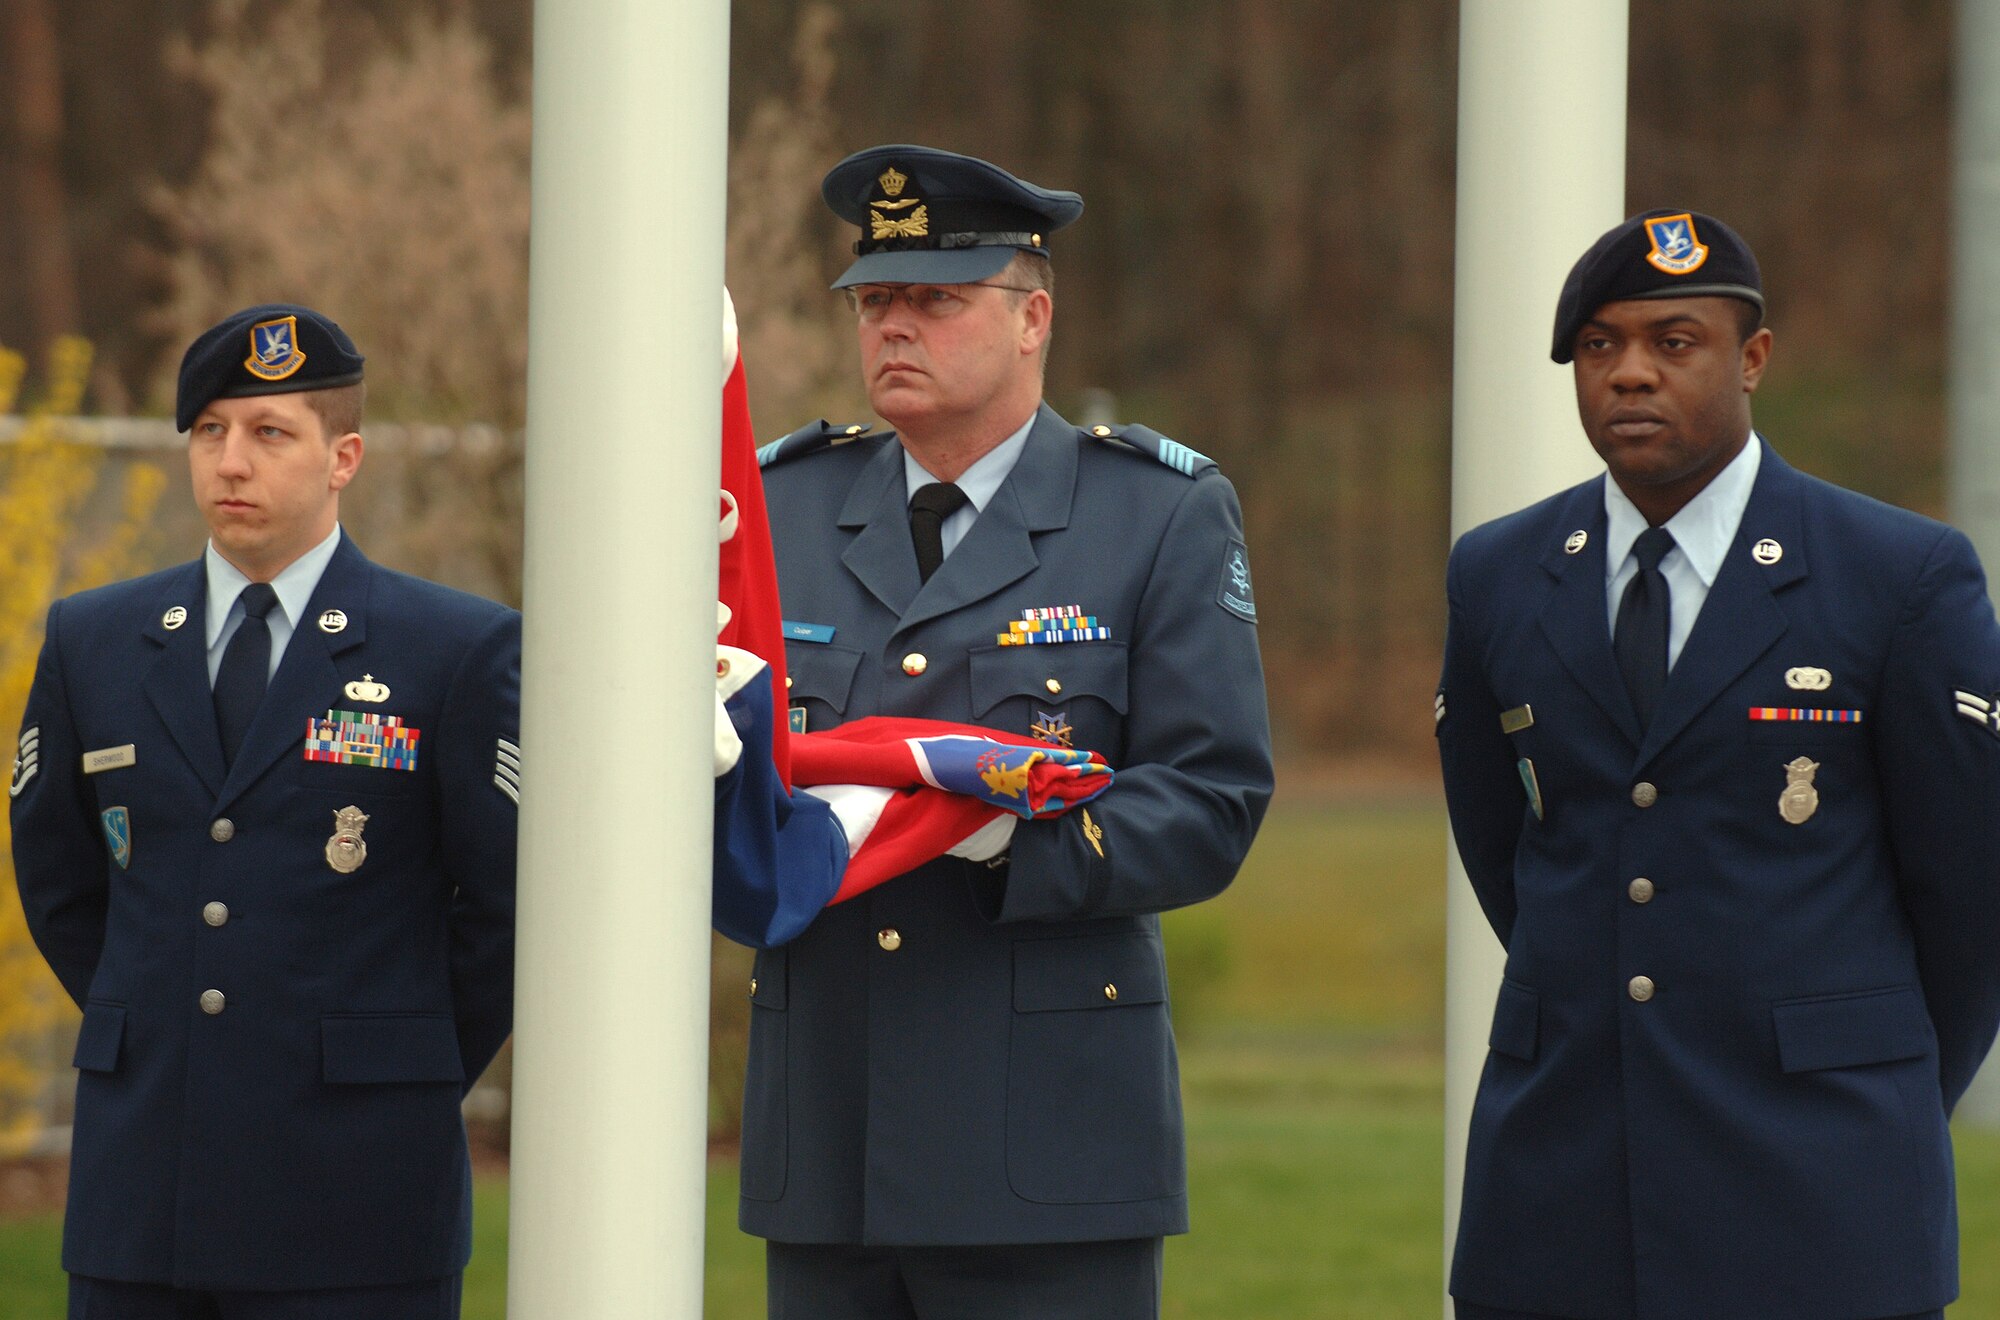 Staff Sgt. Leonard Sherwood (left) and Airman 1st Class Willie Johnson (right) join Royal Netherlands Air Force Sergeant Major Martin Cuiter to hoist the Croatian flag during a ceremony April 8 at Ramstein Air Base, Germany, marking the accession of Croatia and Albania as the 27th and 28th members of NATO. (Defense Department photo/Master Sgt. Scott Wagers)